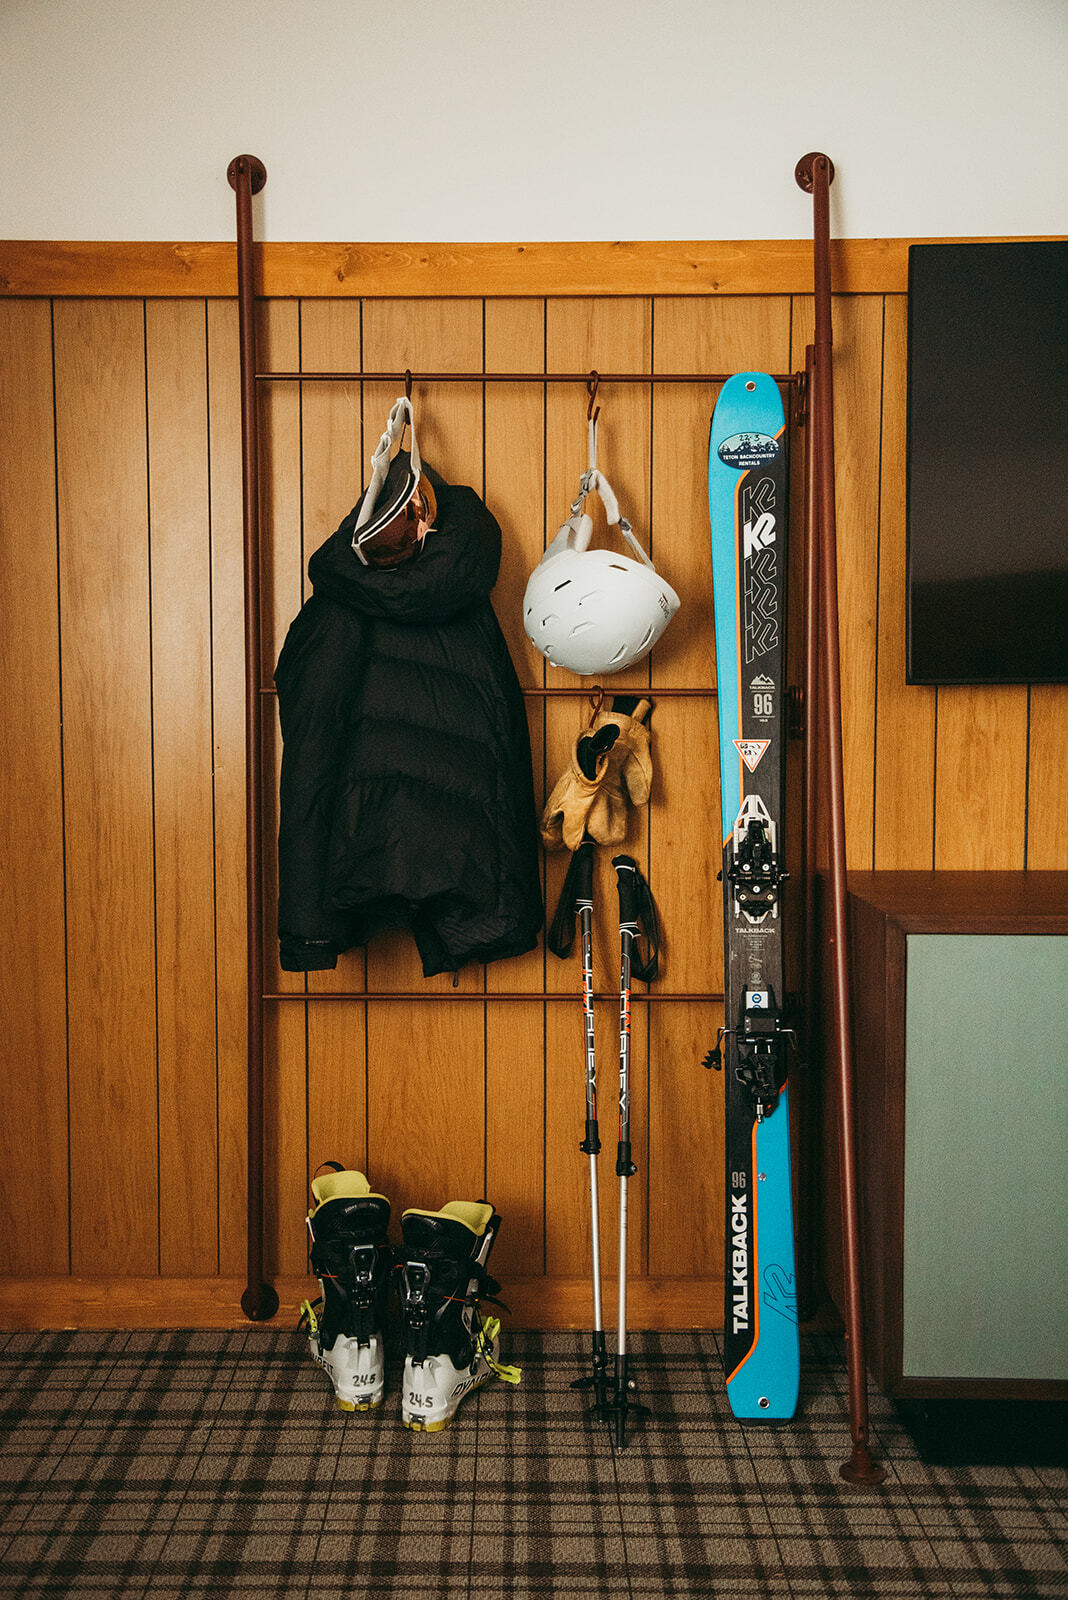 Snow diving clothes, snowboard, and snowshoes are neatly hung for an organized winter gear display.